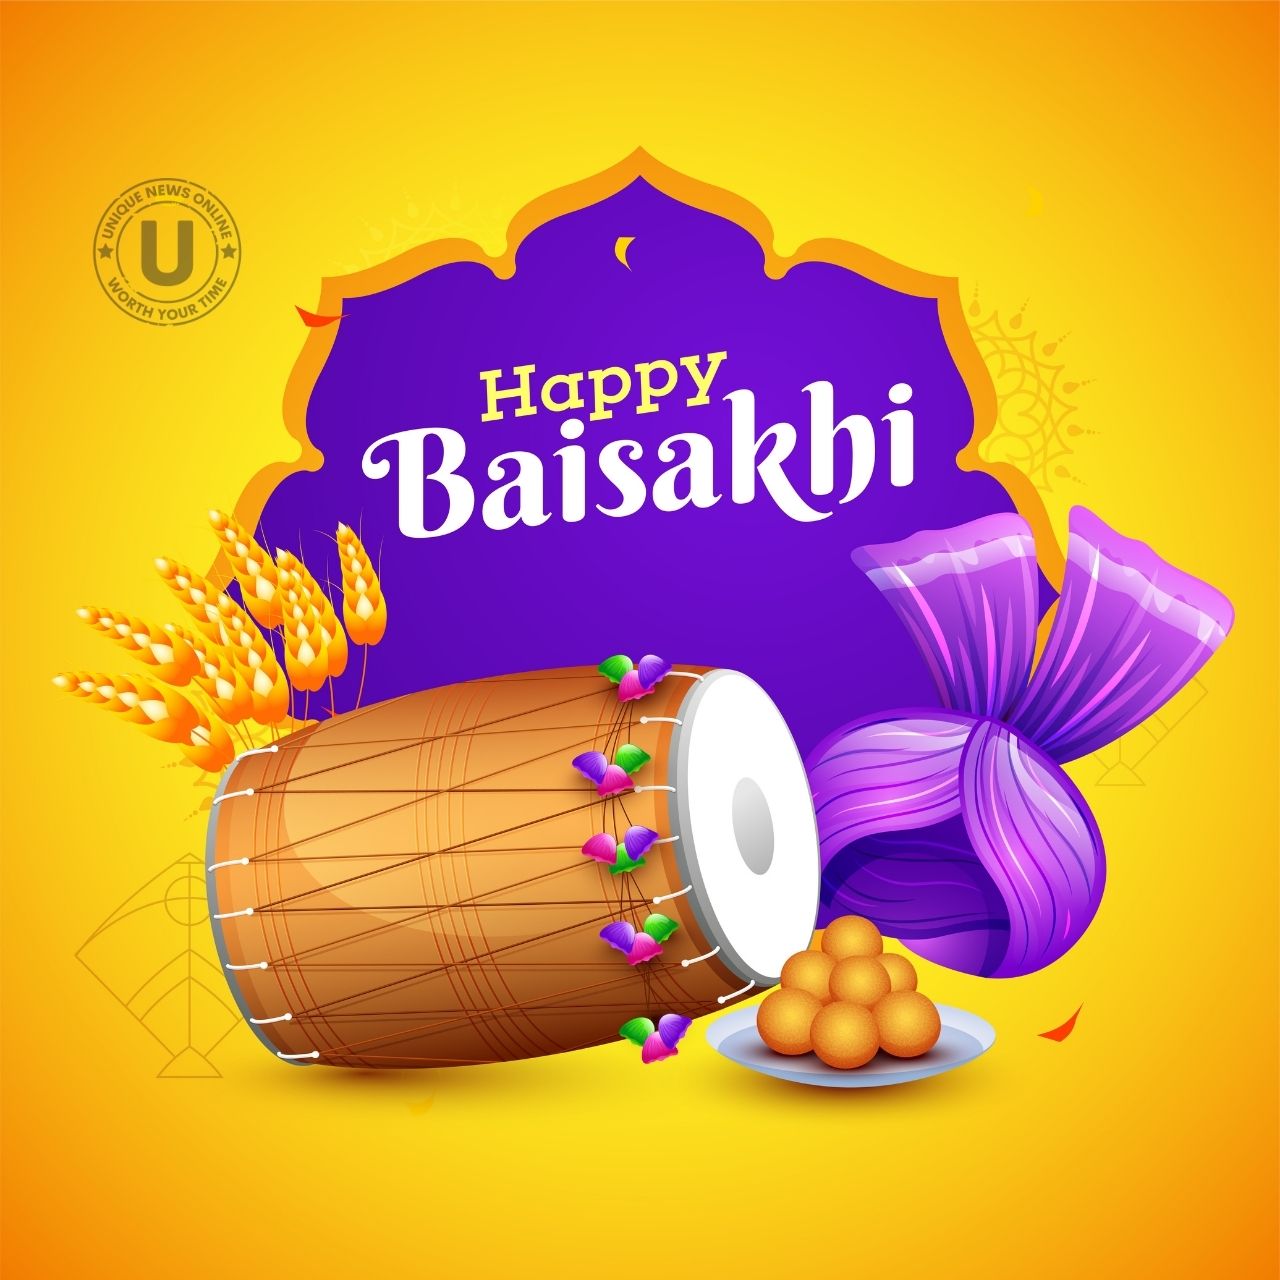 Happy Baisakhi 2022: Best Wishes, Quotes, Messages, Images To Greet Your Friends And Relatives